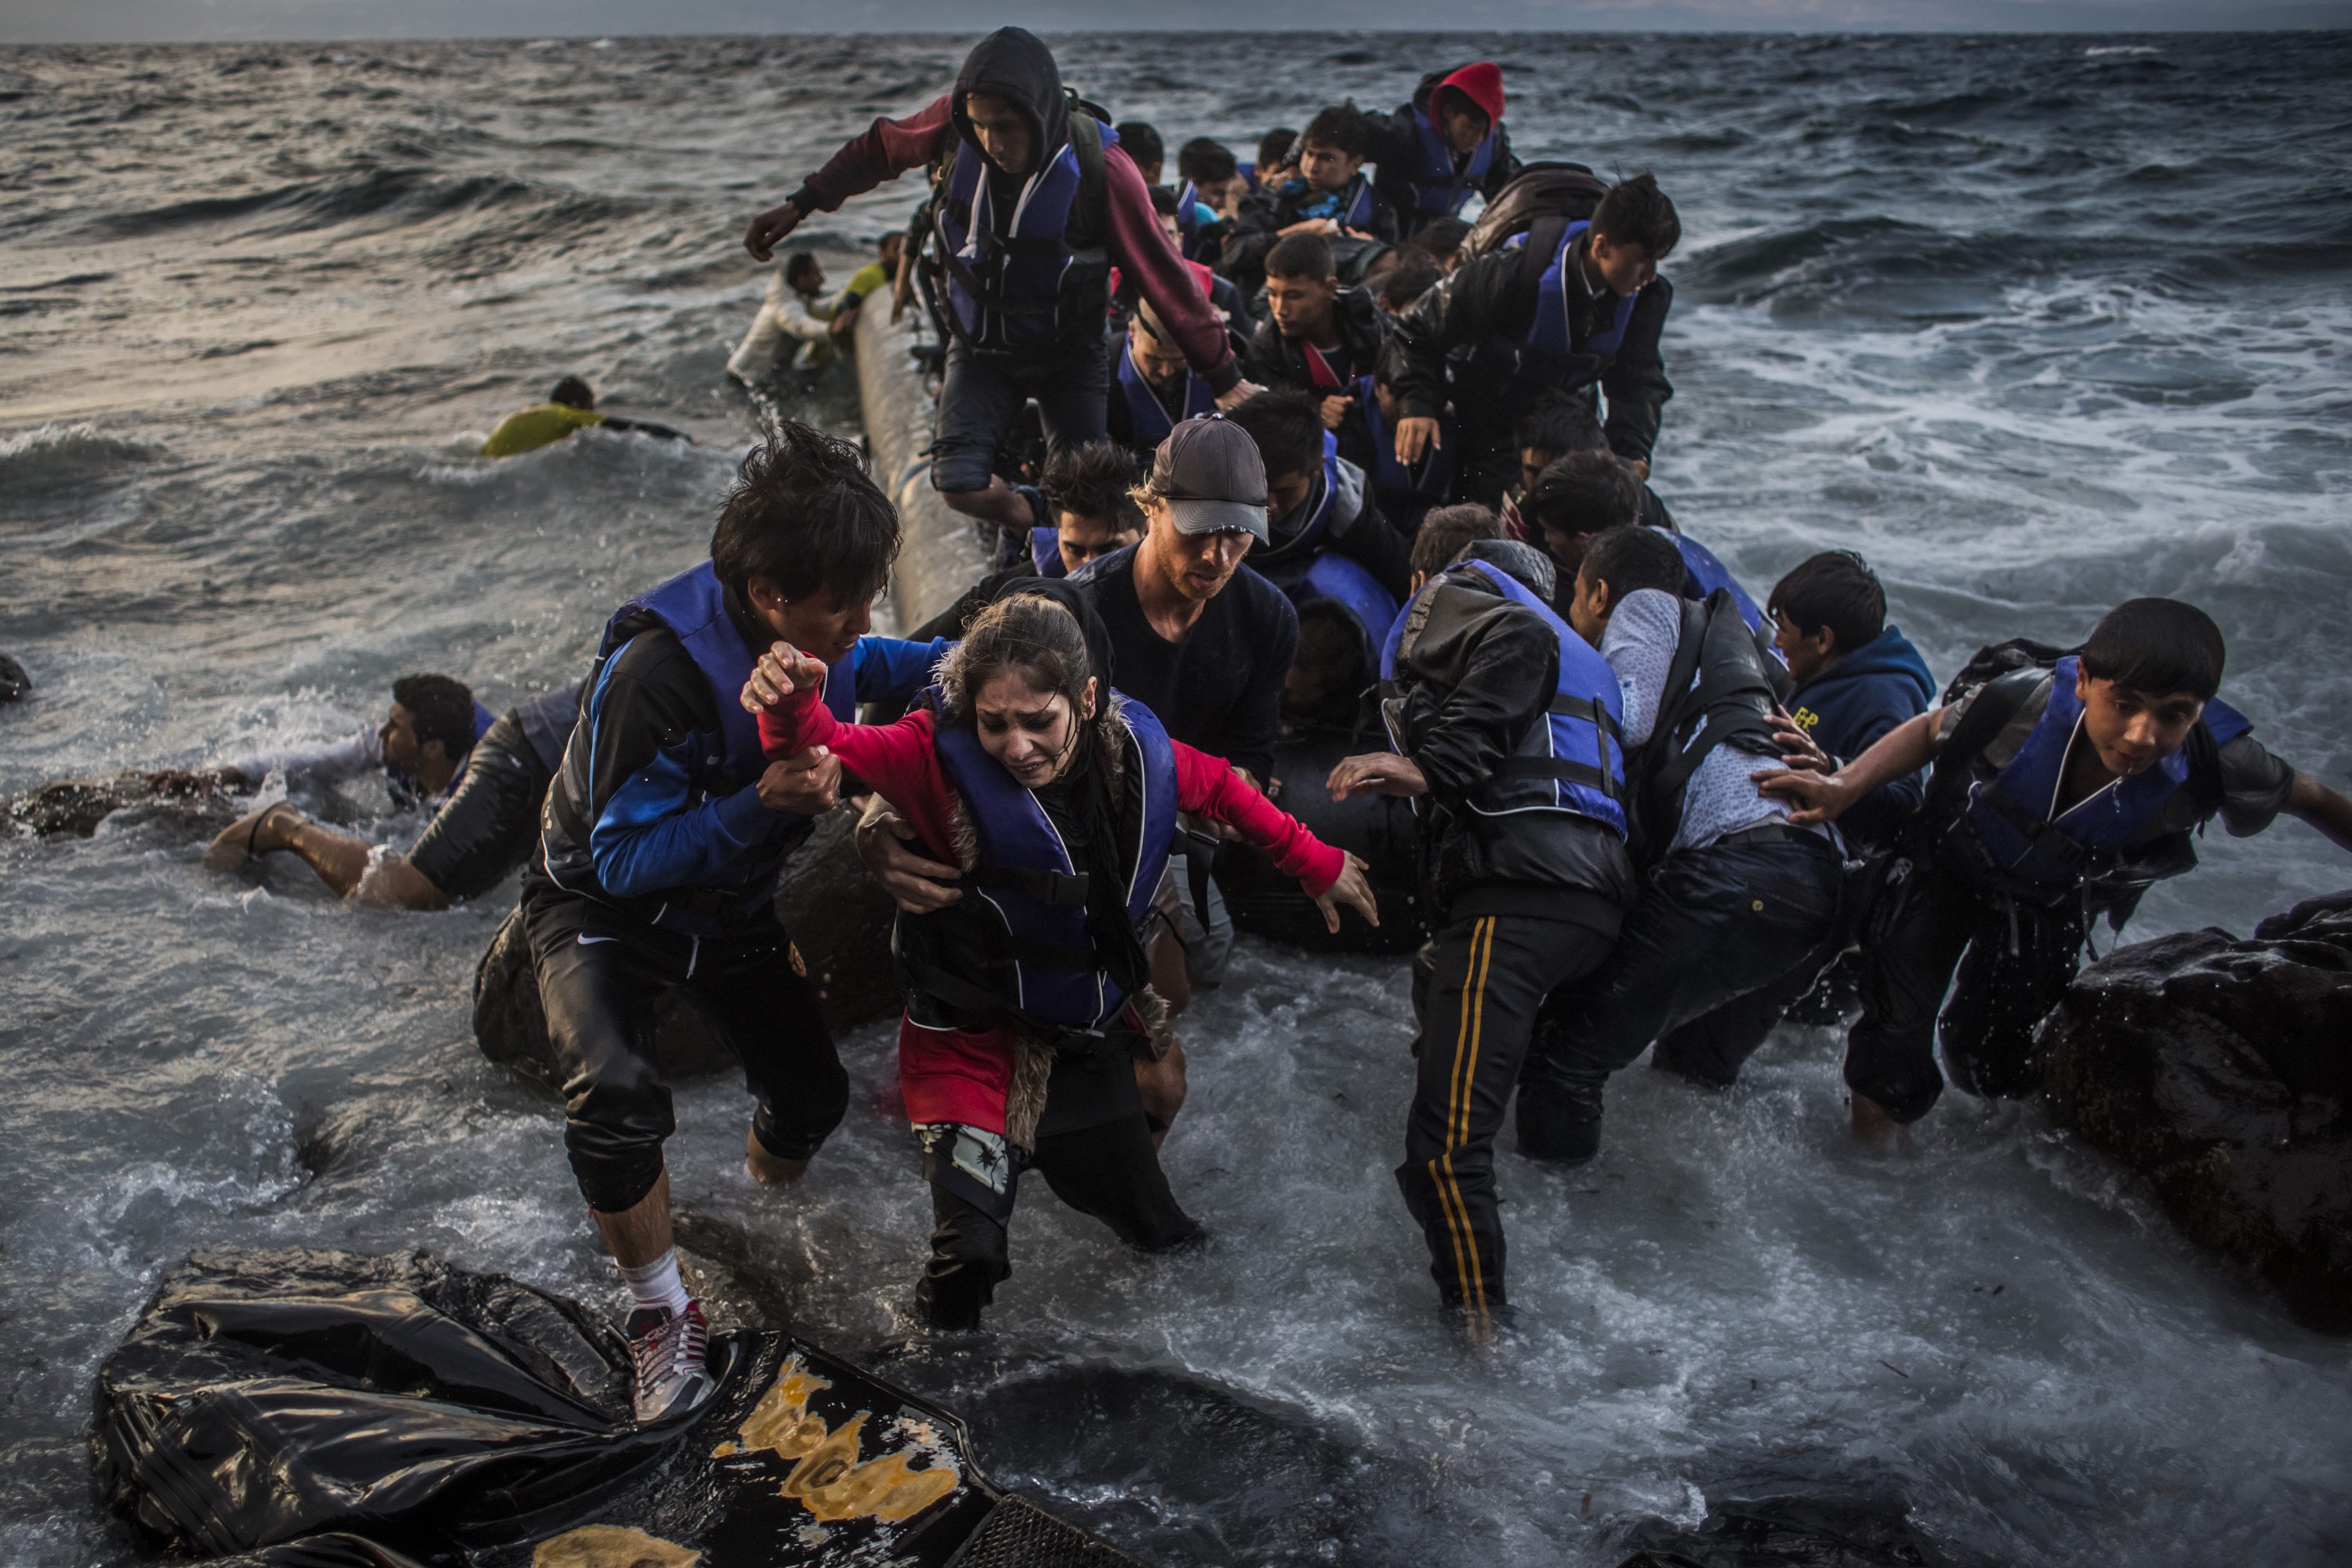 Refugees arrive on the shores of the Greek island of Lesbos, near Skala Sikaminias village, Greece, on Oct. 1, 2015, after crossing the Aegean Sea from Turkey on an inflatable boat (Matej Divizna—Getty Images)